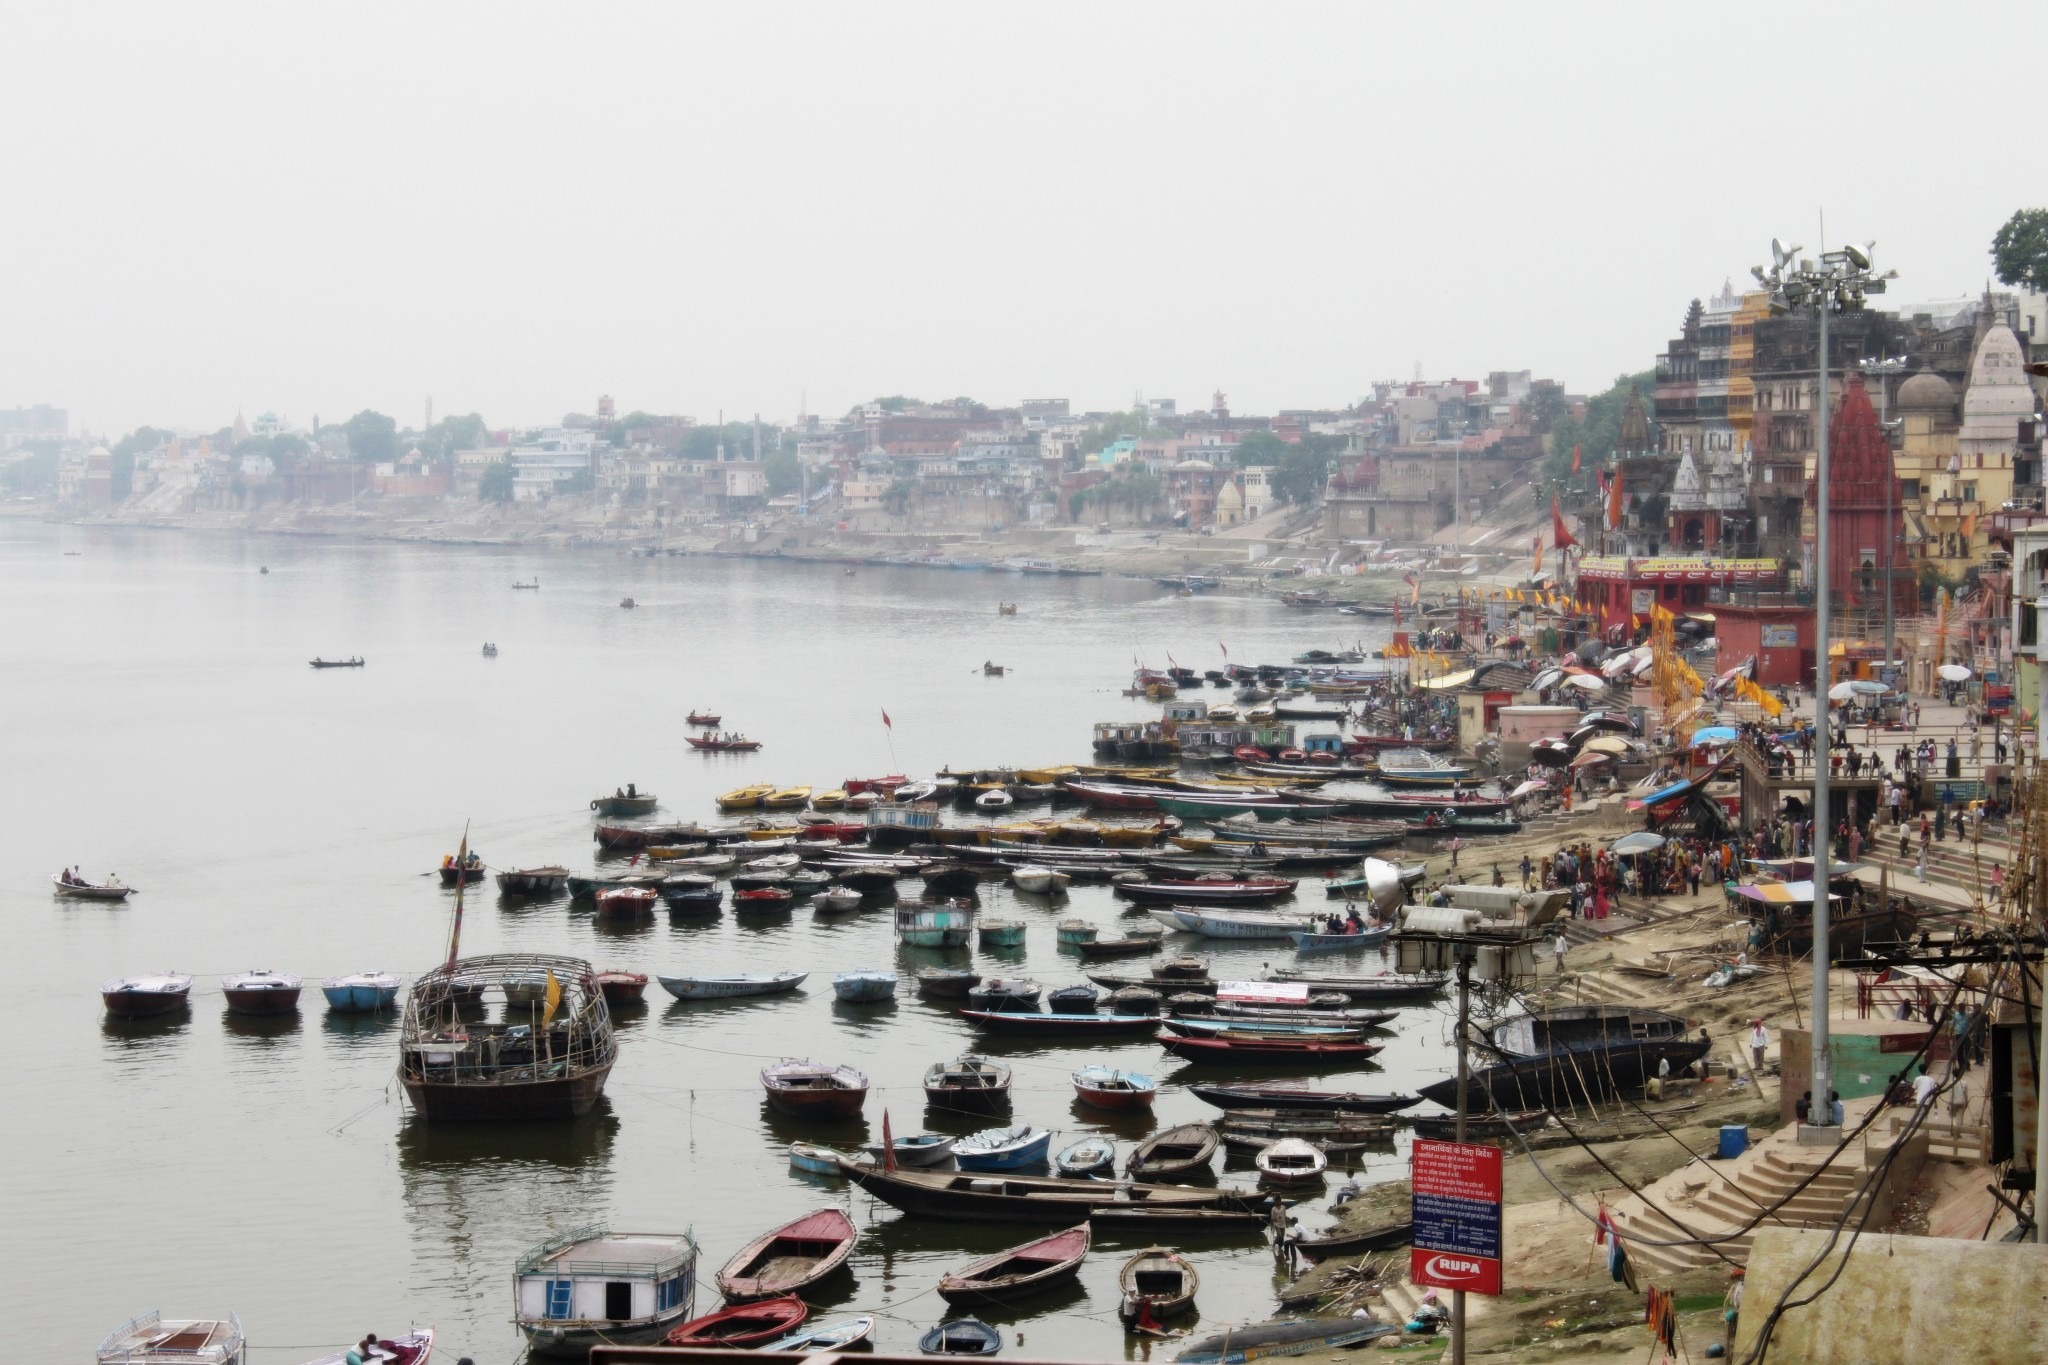 boats on the Ganges River in Varanasi